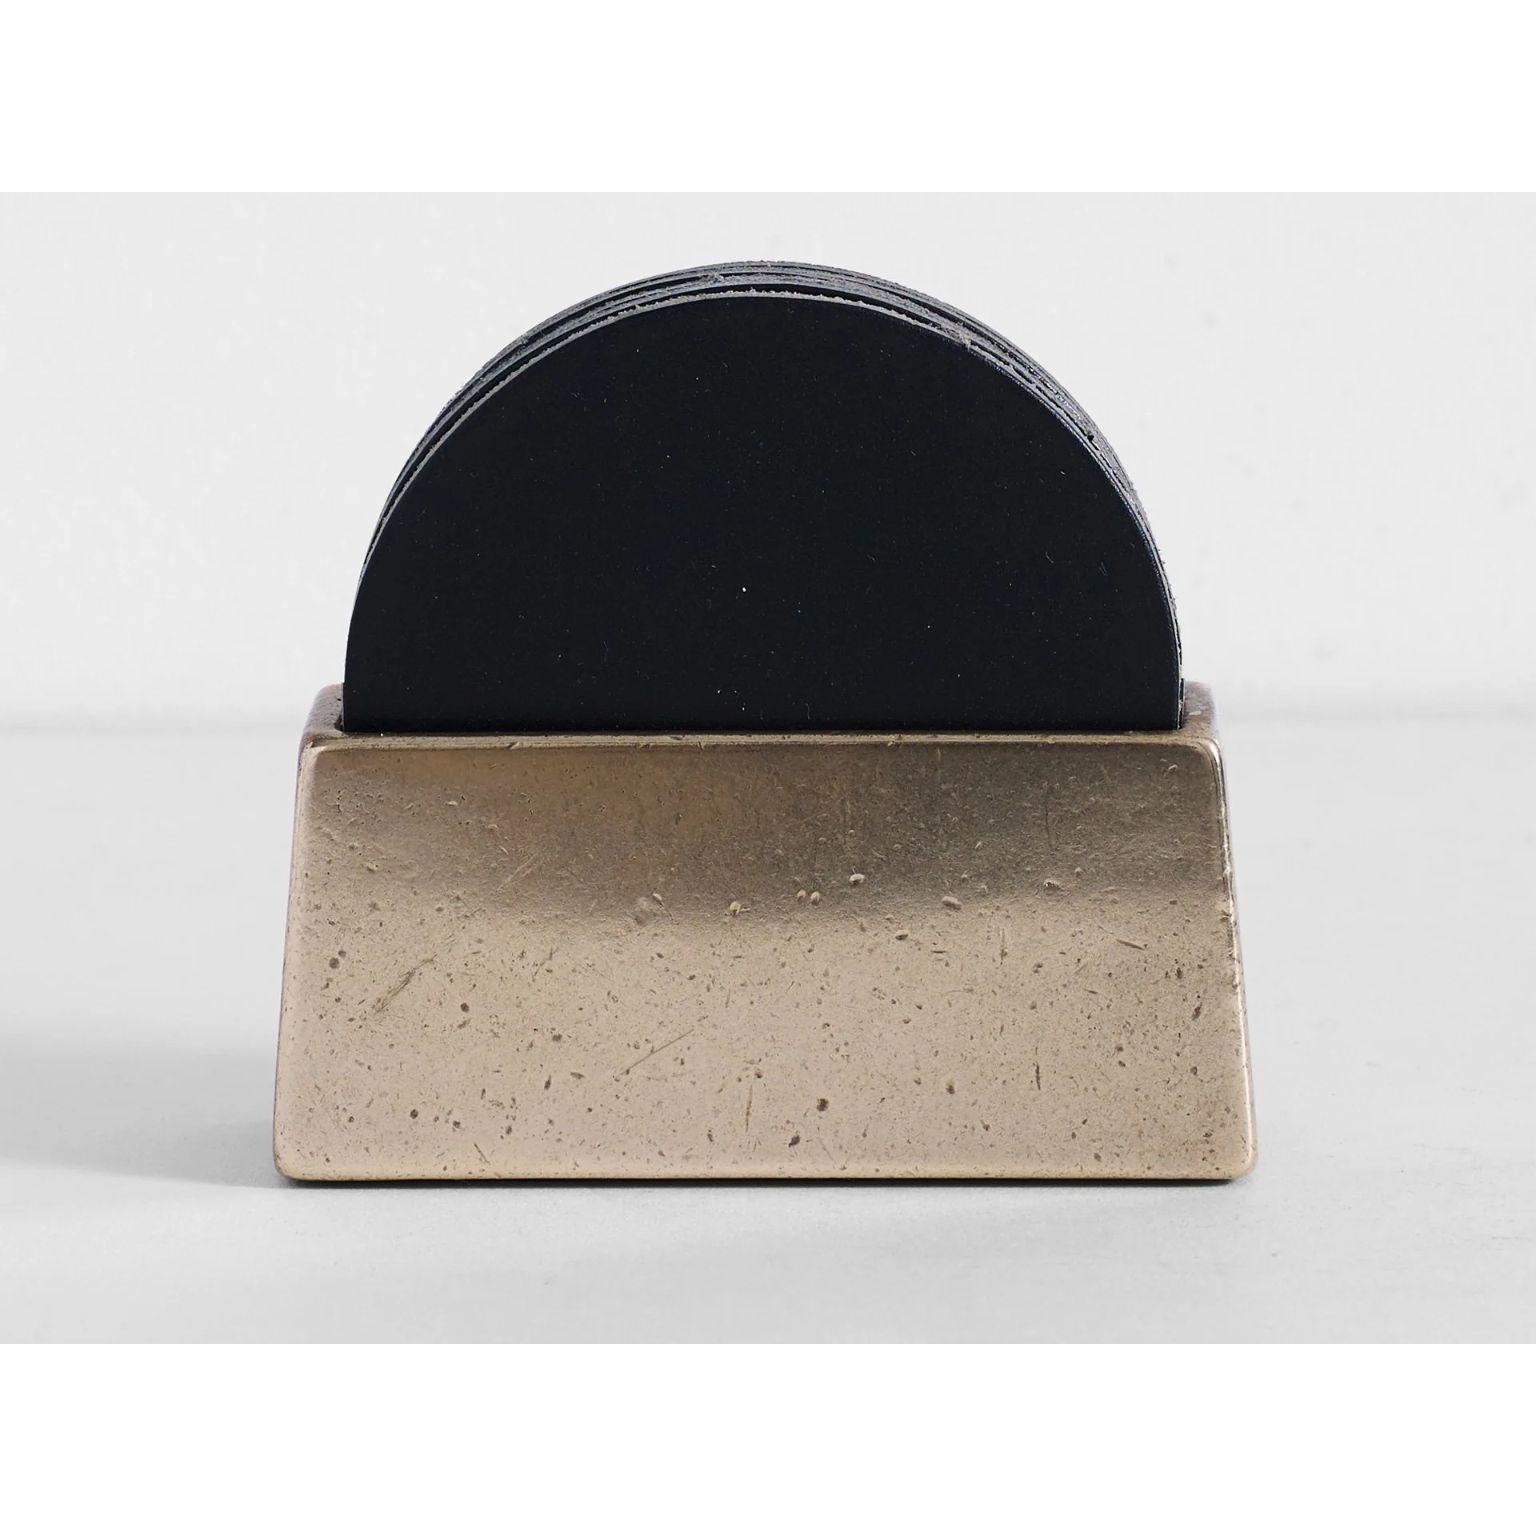 Brass Coaster Holder With Black Coaster Set by Henry Wilson
Dimensions: D 4 x W 4.8 x H 10.5 cm
Materials: Solid brass, Leather

Sand cast in solid brass and hand finished.
Holds 6 Tan leather coasters that are included with holder. 
They are